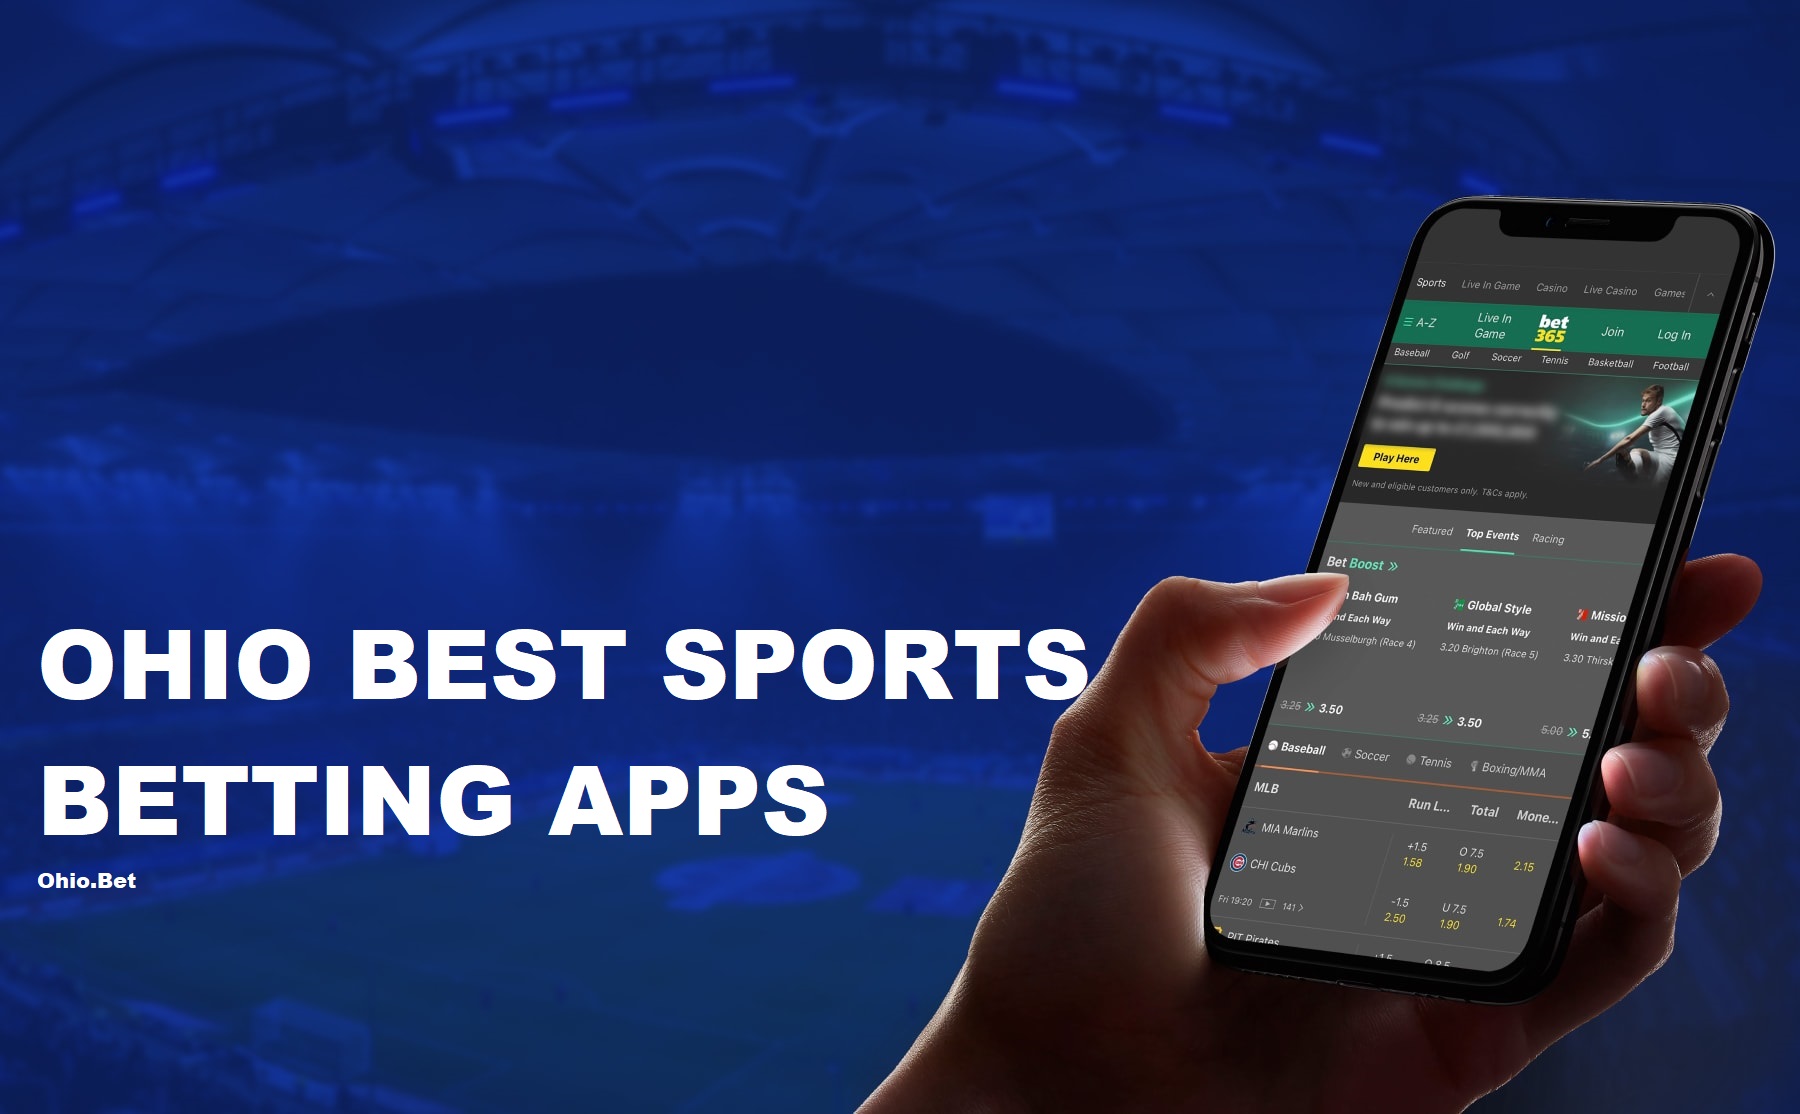 Enjoy Great Online Sports With the Mobile App in 2023